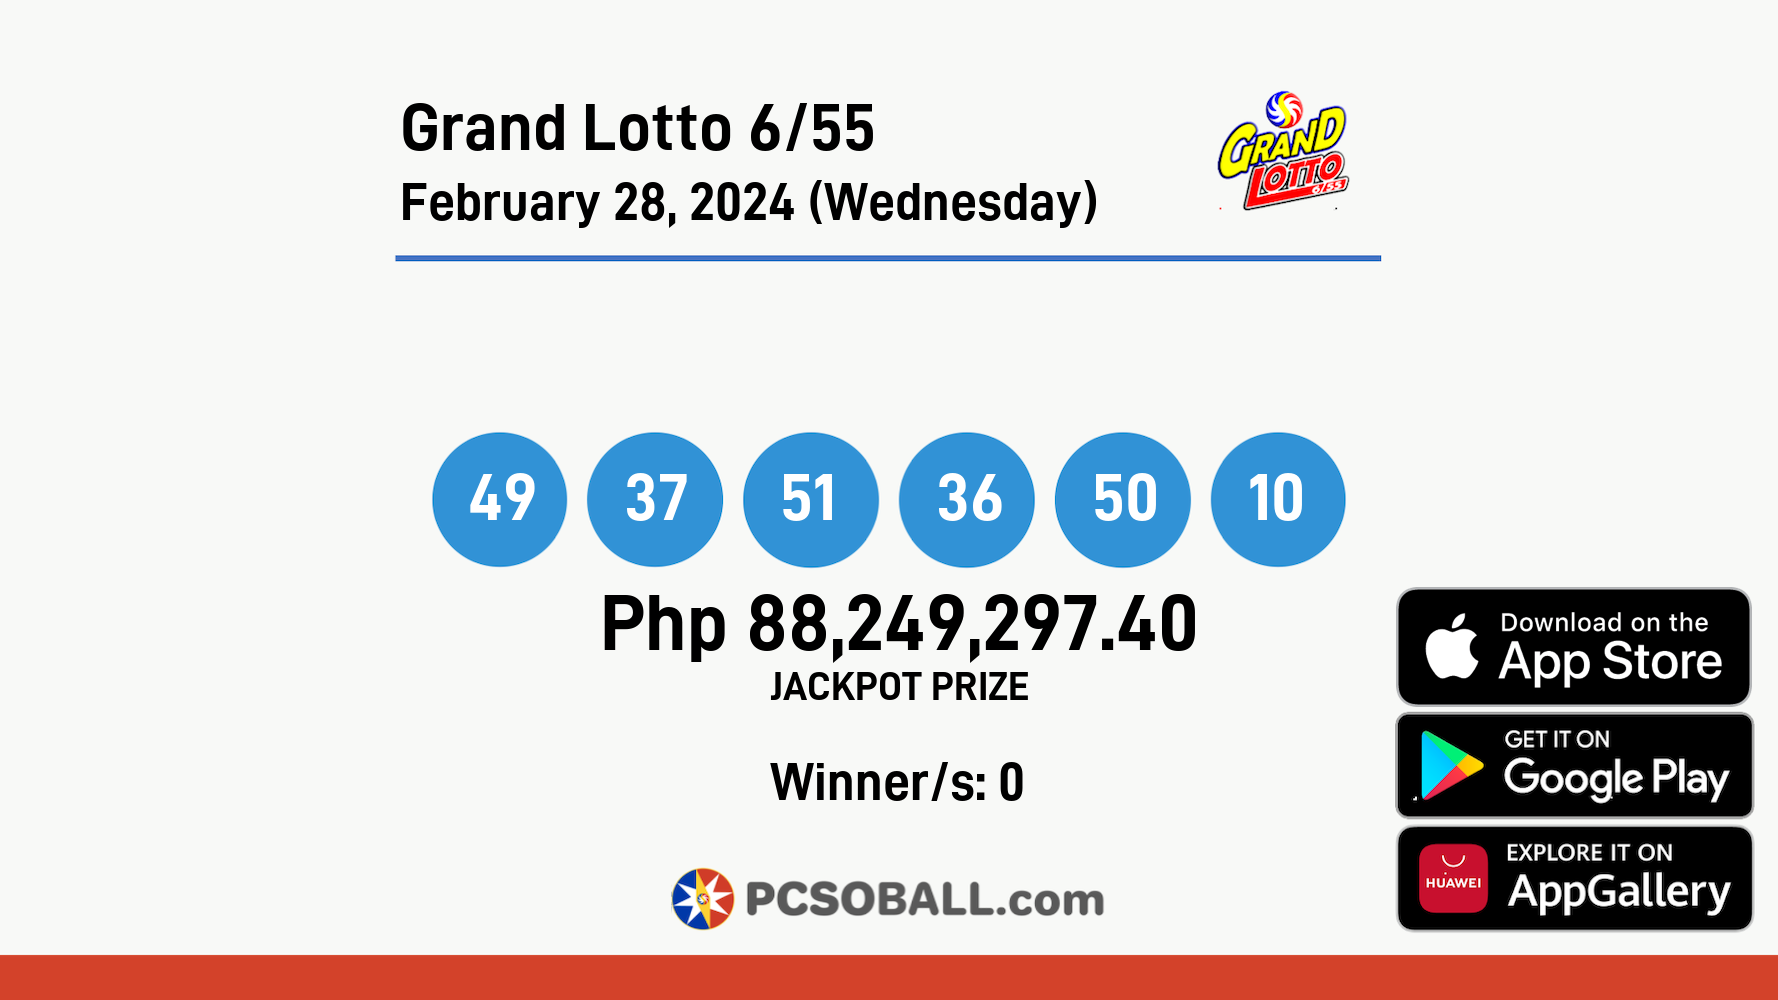 Grand Lotto 6/55 February 28, 2024 (Wednesday) Result